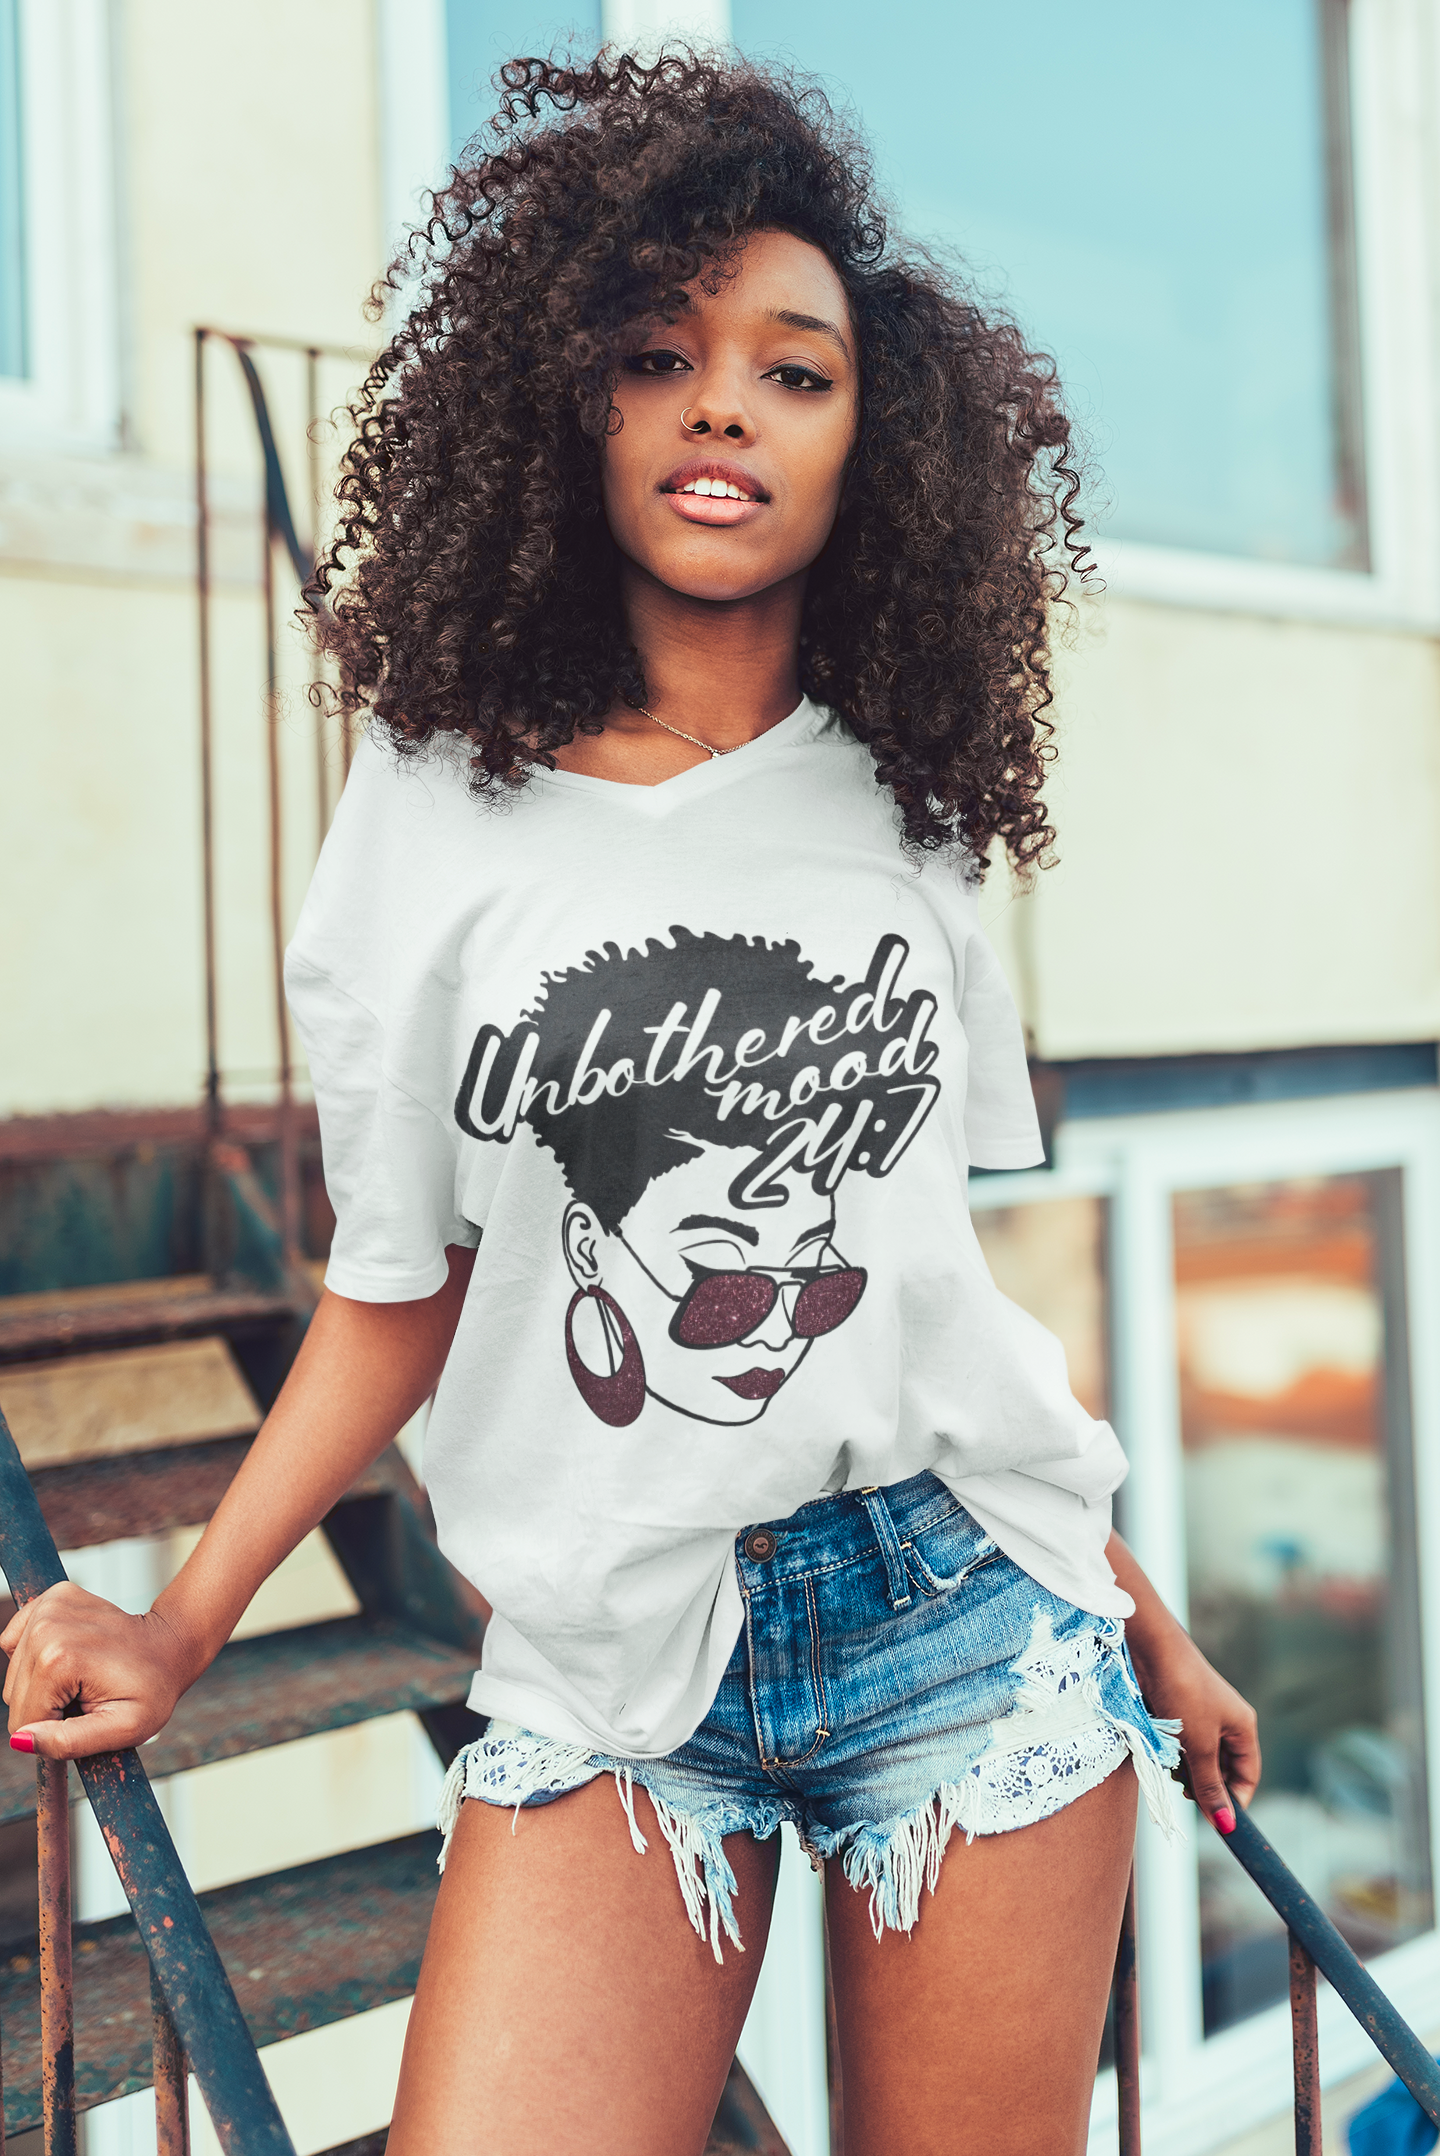 Unbothered 24/7 - Short Sleeve T